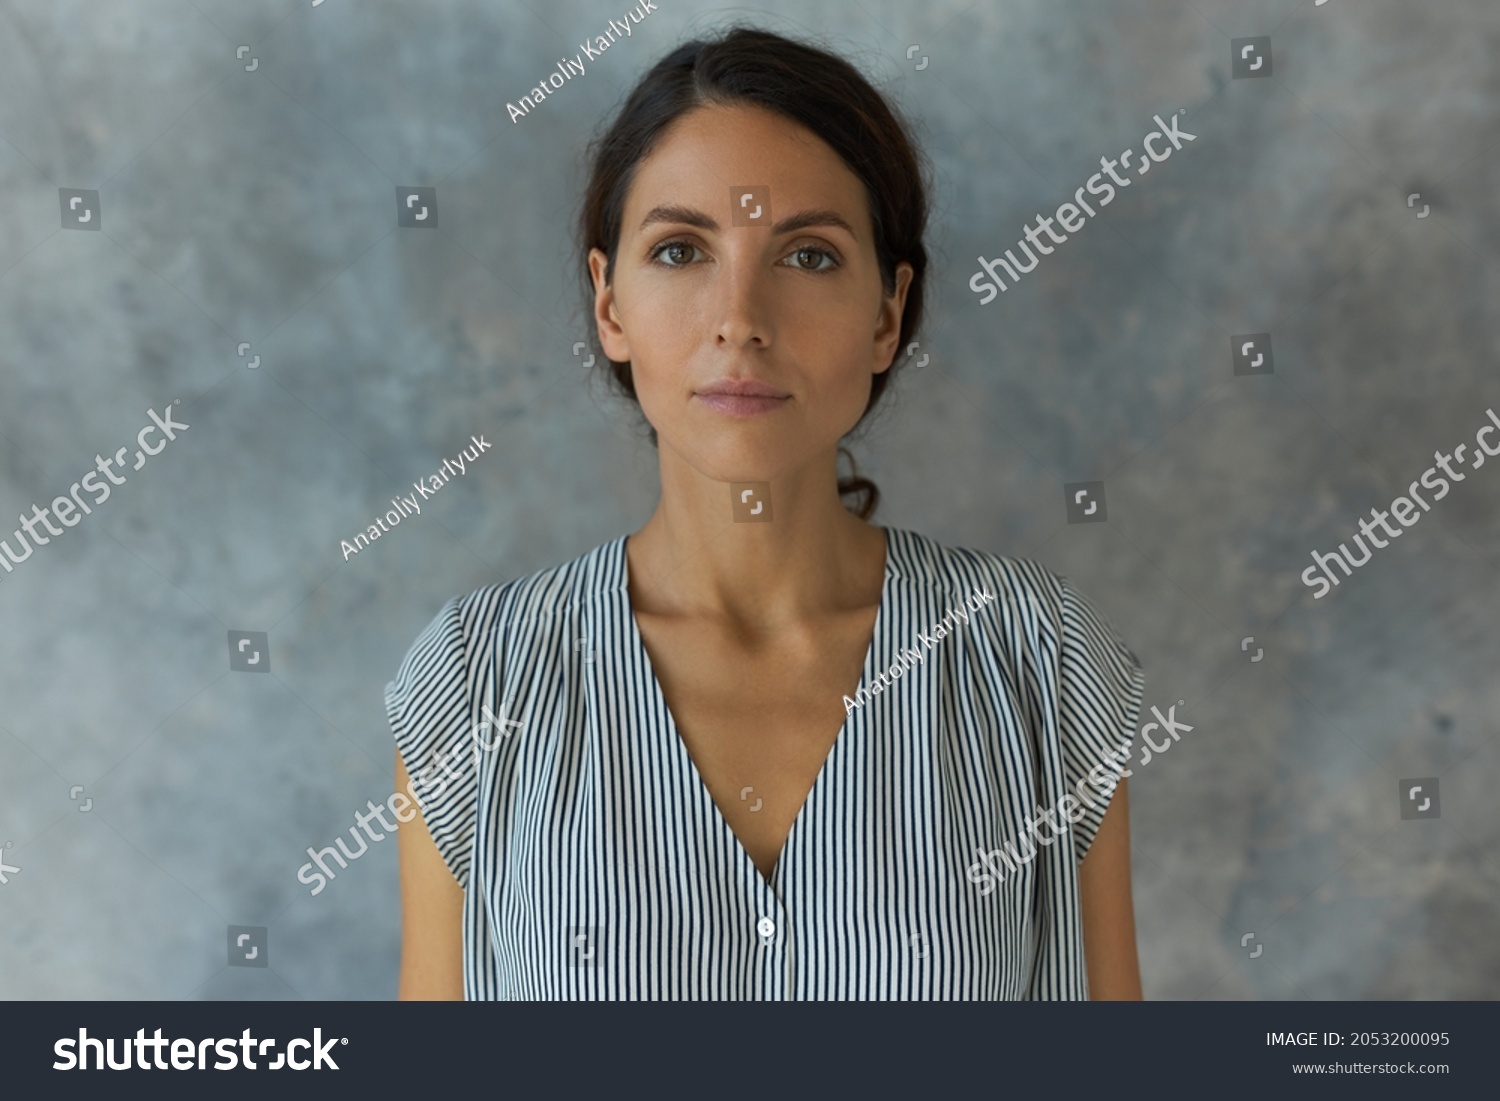 Horizontal indoor portrait of charming young lady posing for ID or passport photo, having calm face expression, looking straight at camera without smile, standing against textured studio wall #2053200095